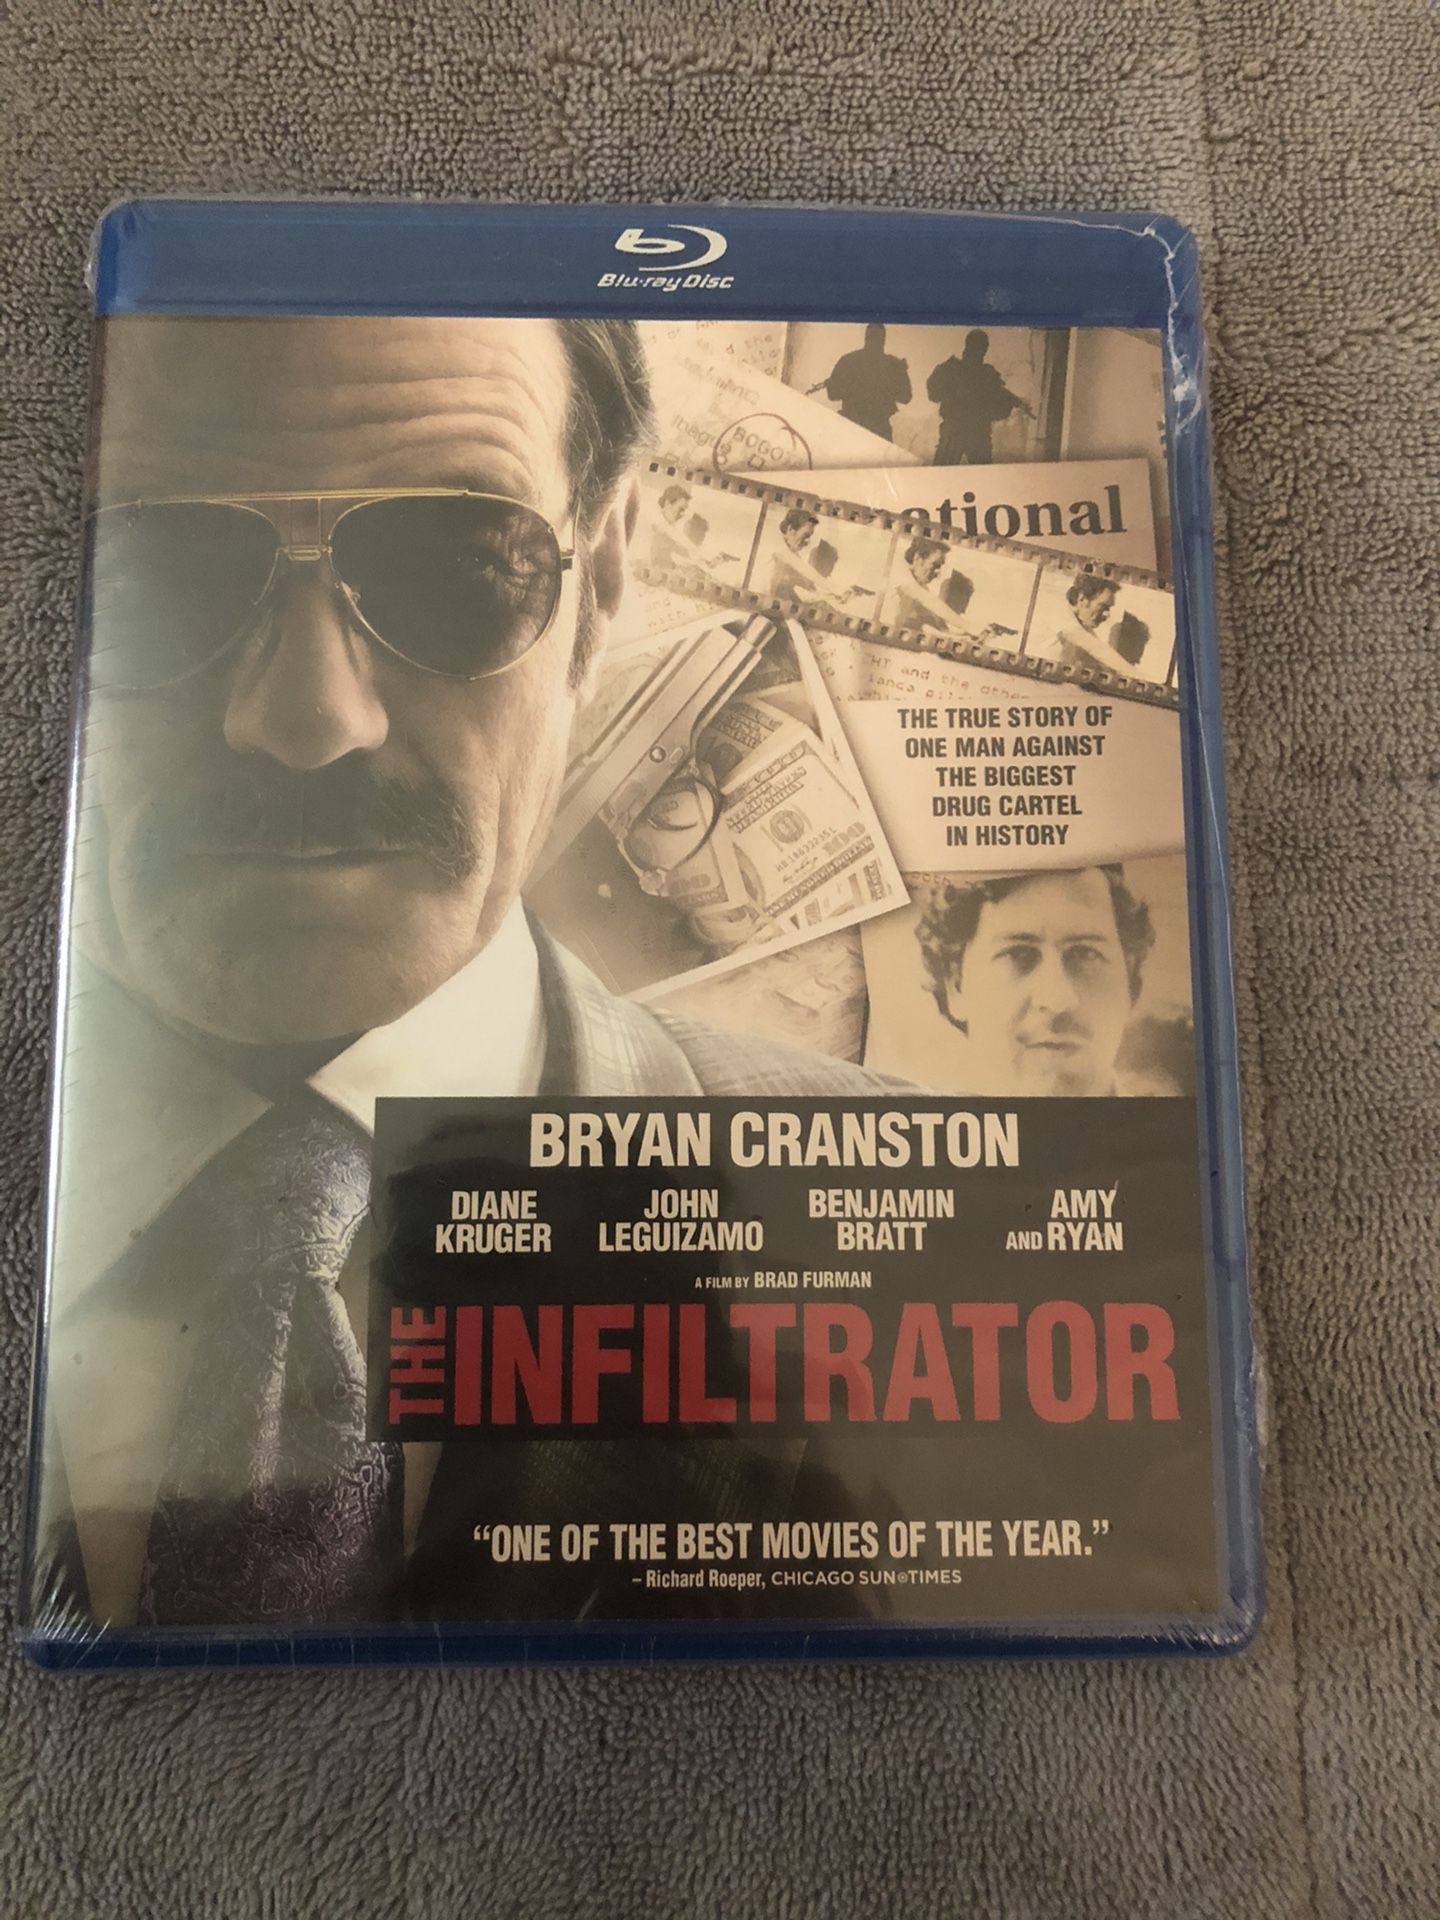 The Infiltrator Blu-ray Still Sealed